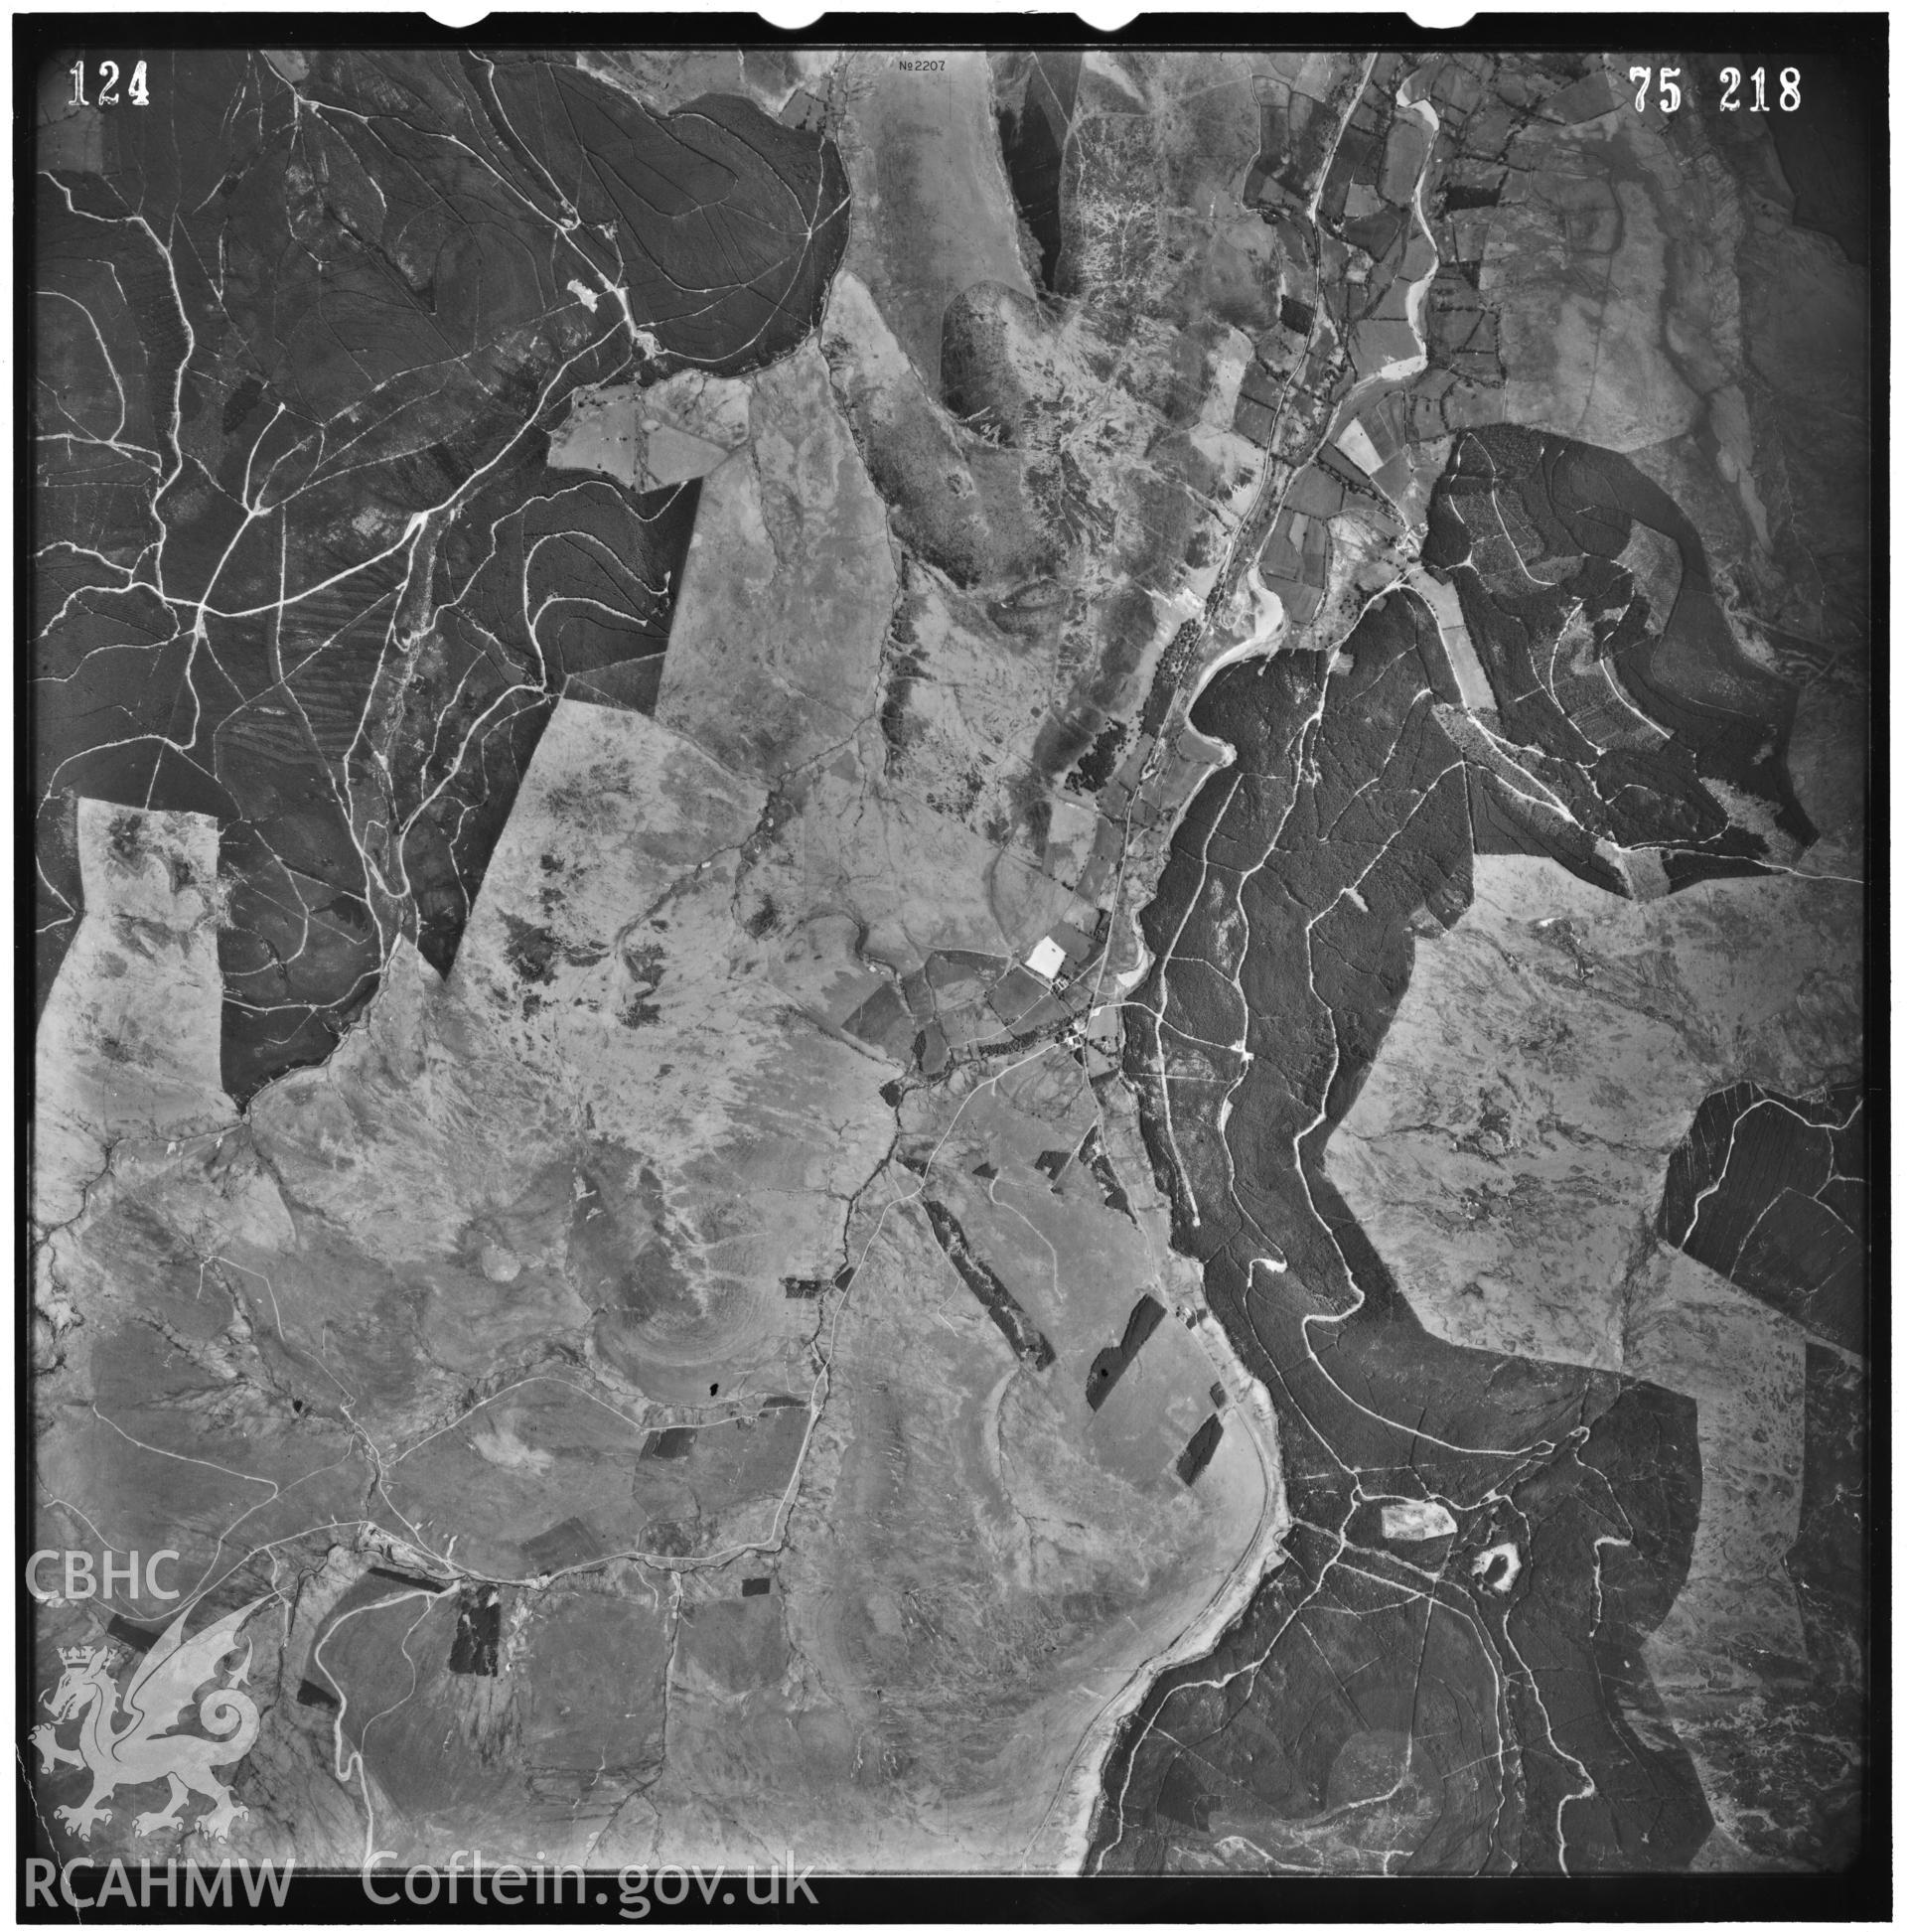 Digitized copy of an aerial photograph showing the Plynlimon area, taken by Ordnance Survey, 1975.